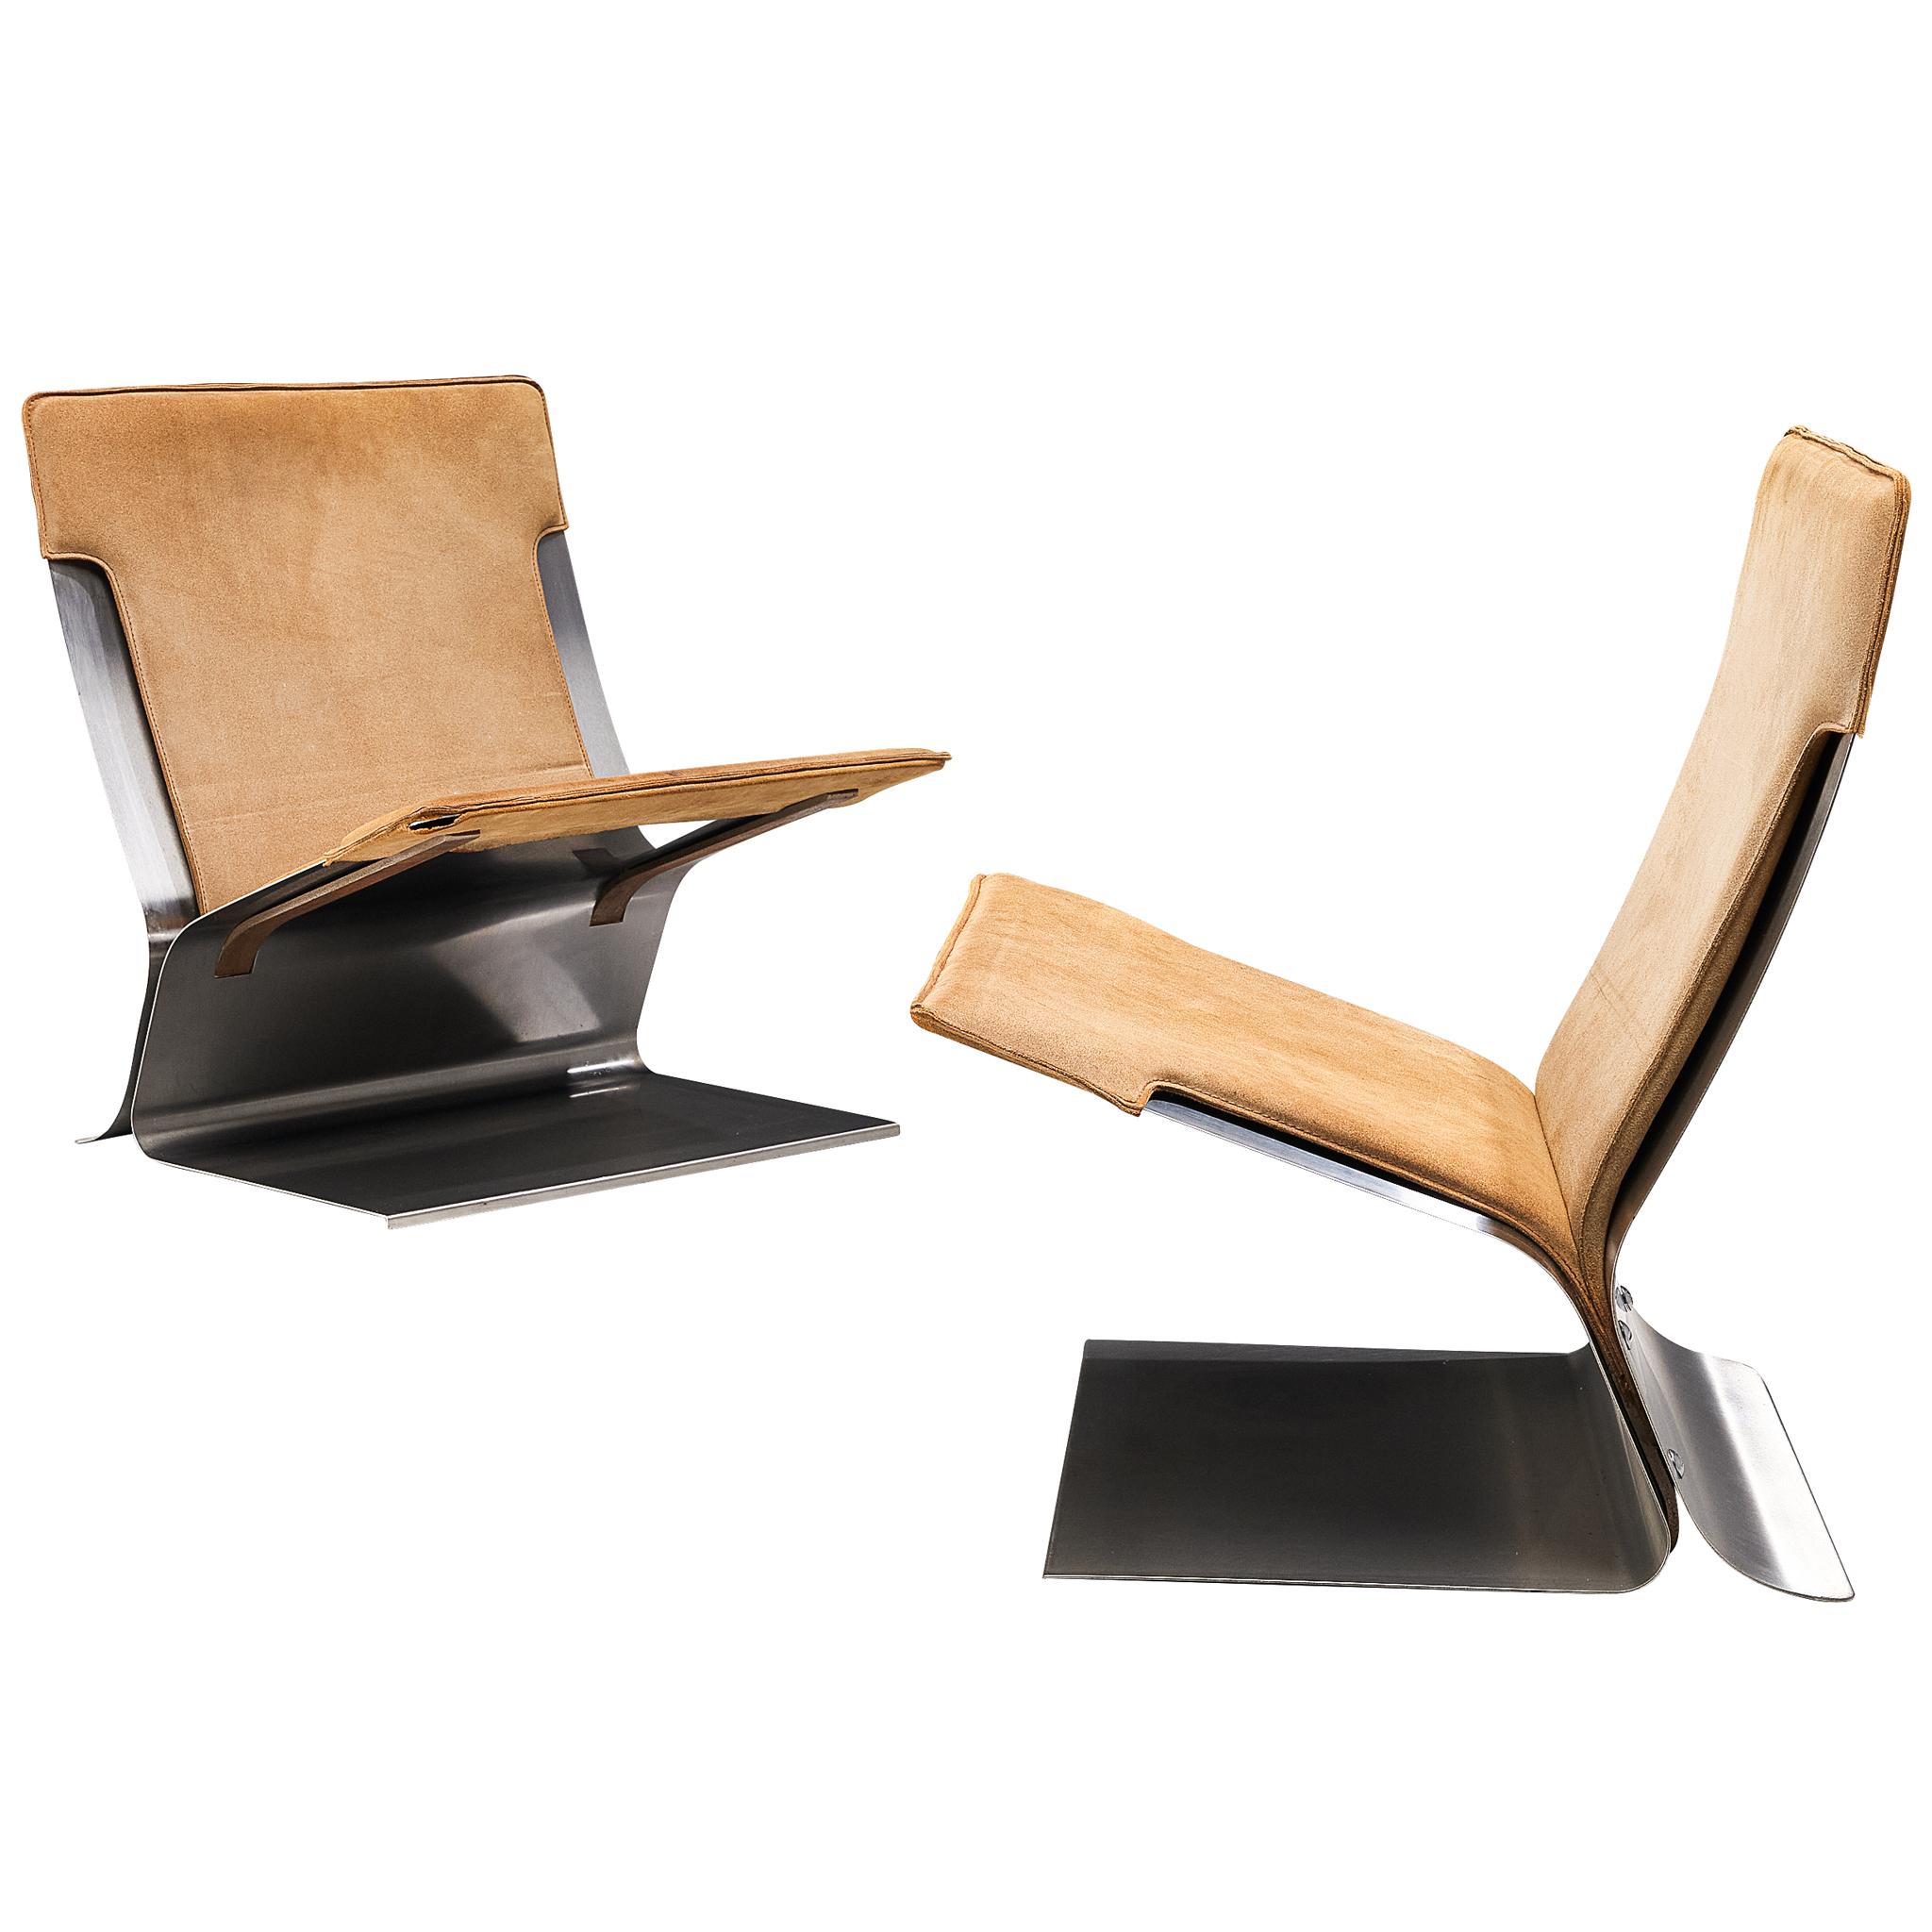 Pierre Folie for Jacques Charpentier 'Chauffeuse' Pair of Lounge Chairs 